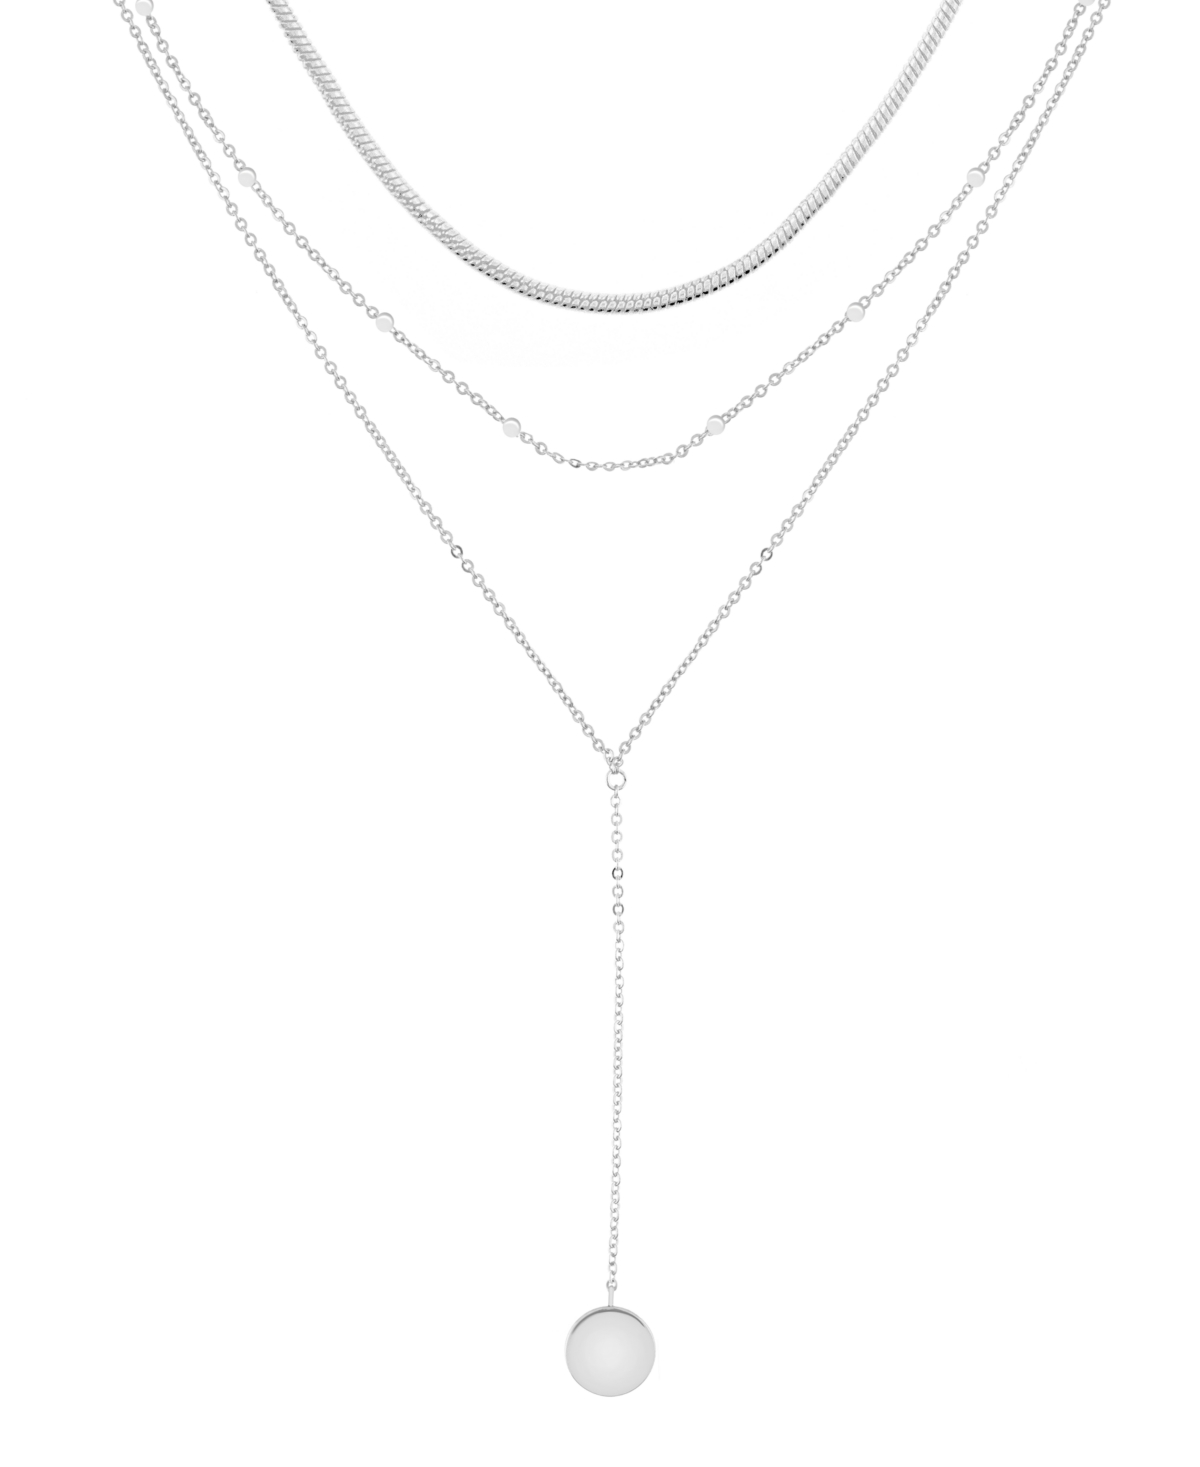 Triple Chain 15" Layered Y-Necklace in Silver Plate - Silver